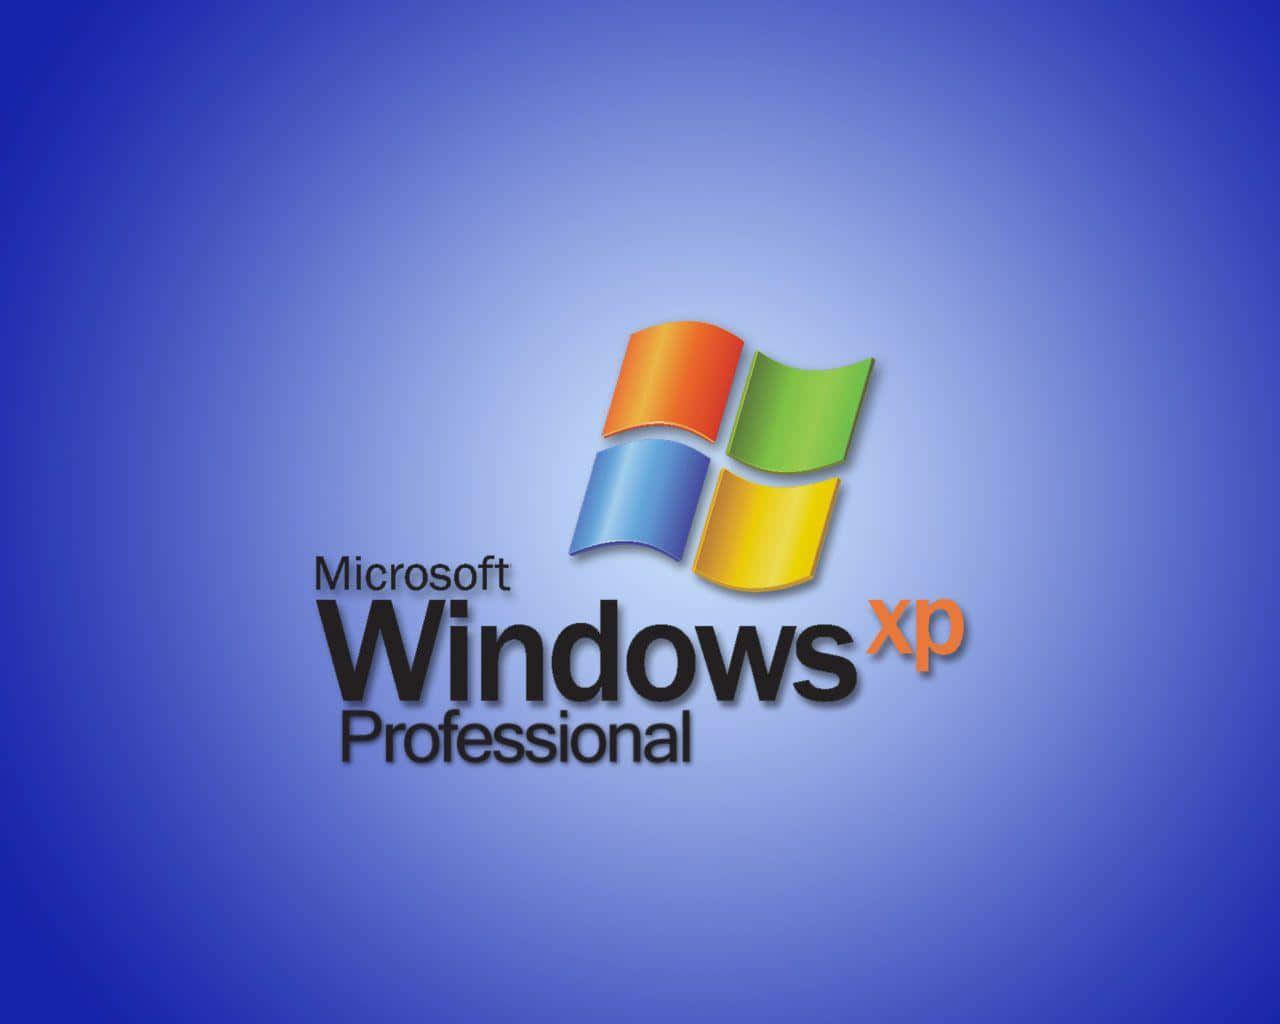 Access Windows XP's endless possibilities